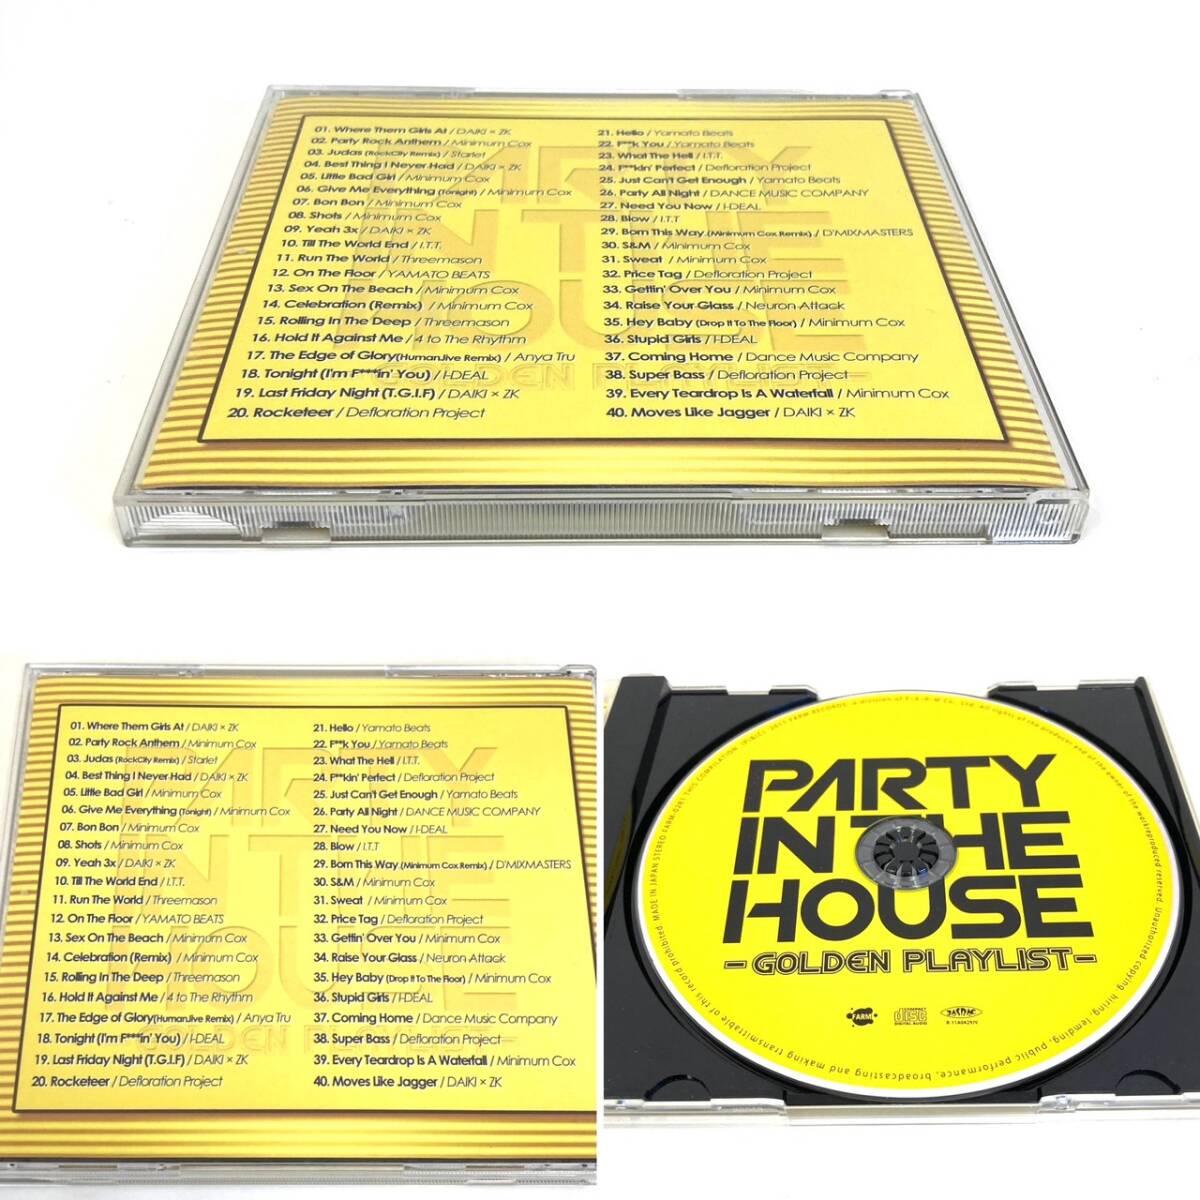 CD　1920　オムニバス　PARTY IN THE HOUSE ―GOLDEN PLAYLIST―